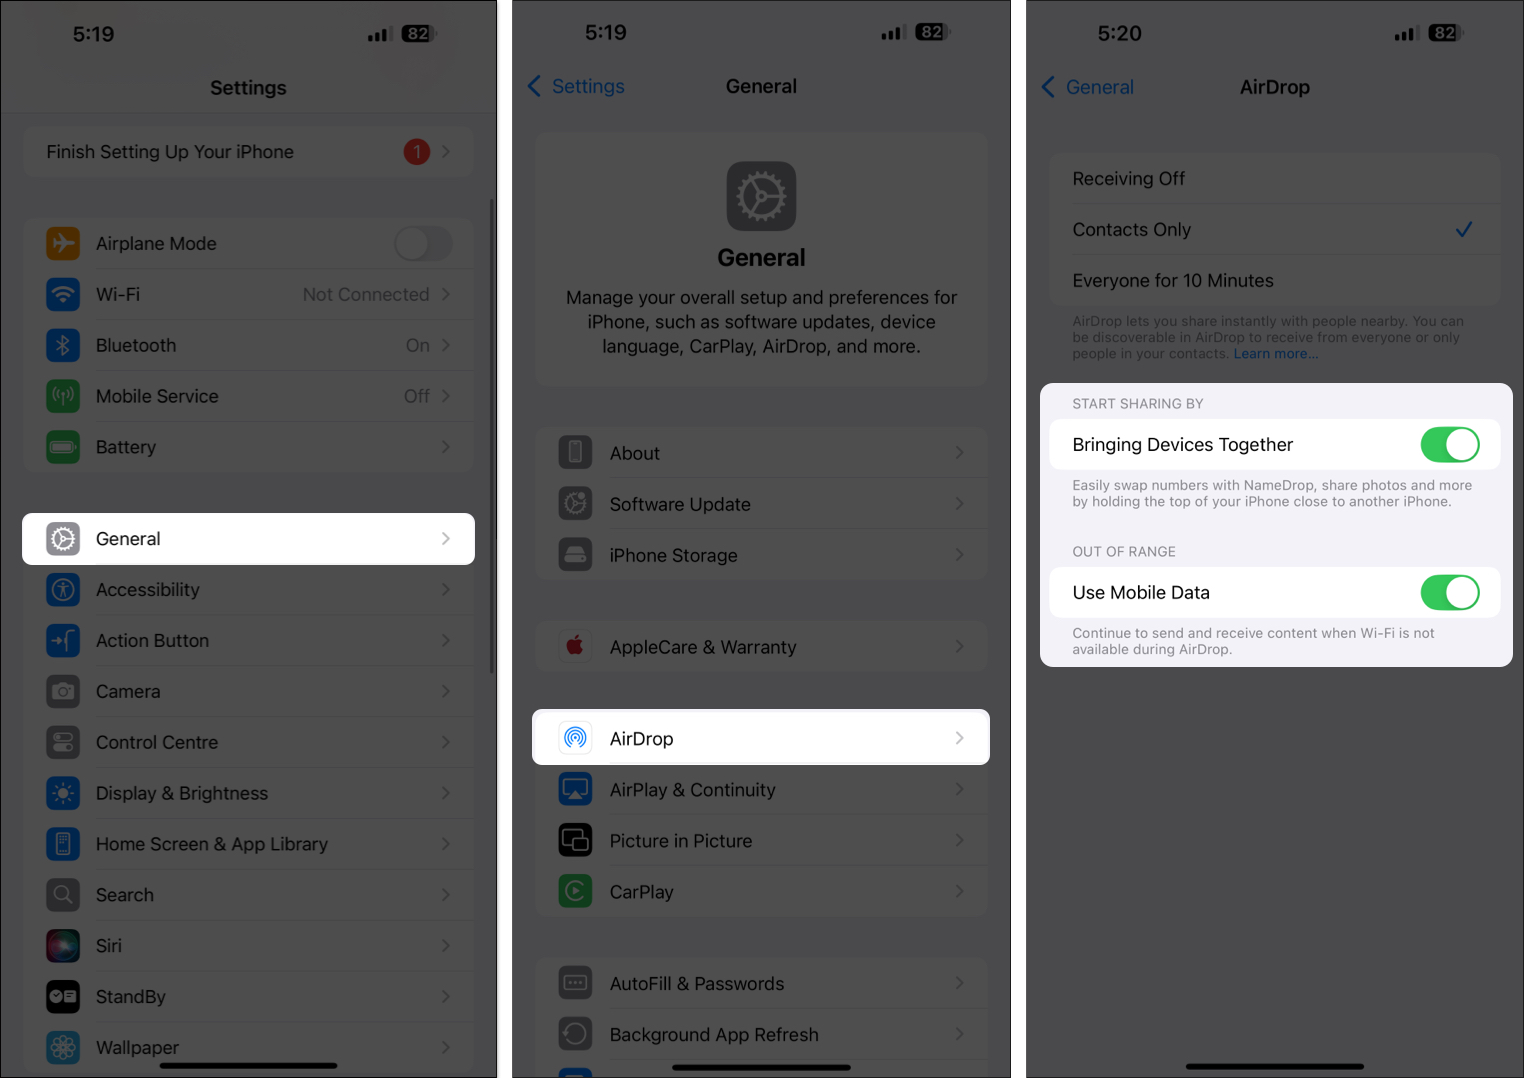 Customize AirDrop Settings from iPhone